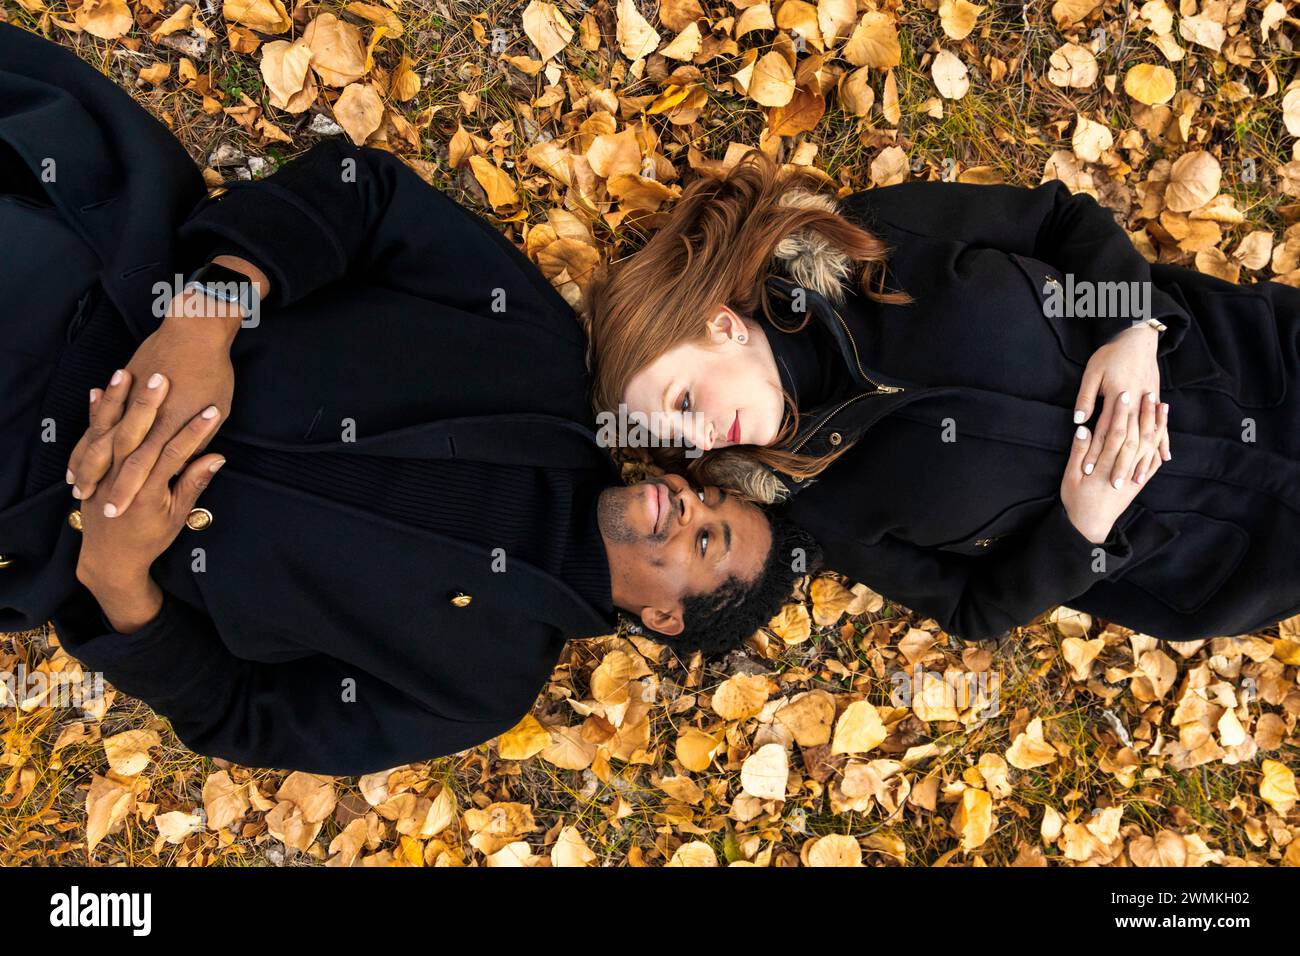 A mixed race couple lying on the ground in the fall leaves, looking at each other face to face, while spending quality time together during a fall ... Stock Photo